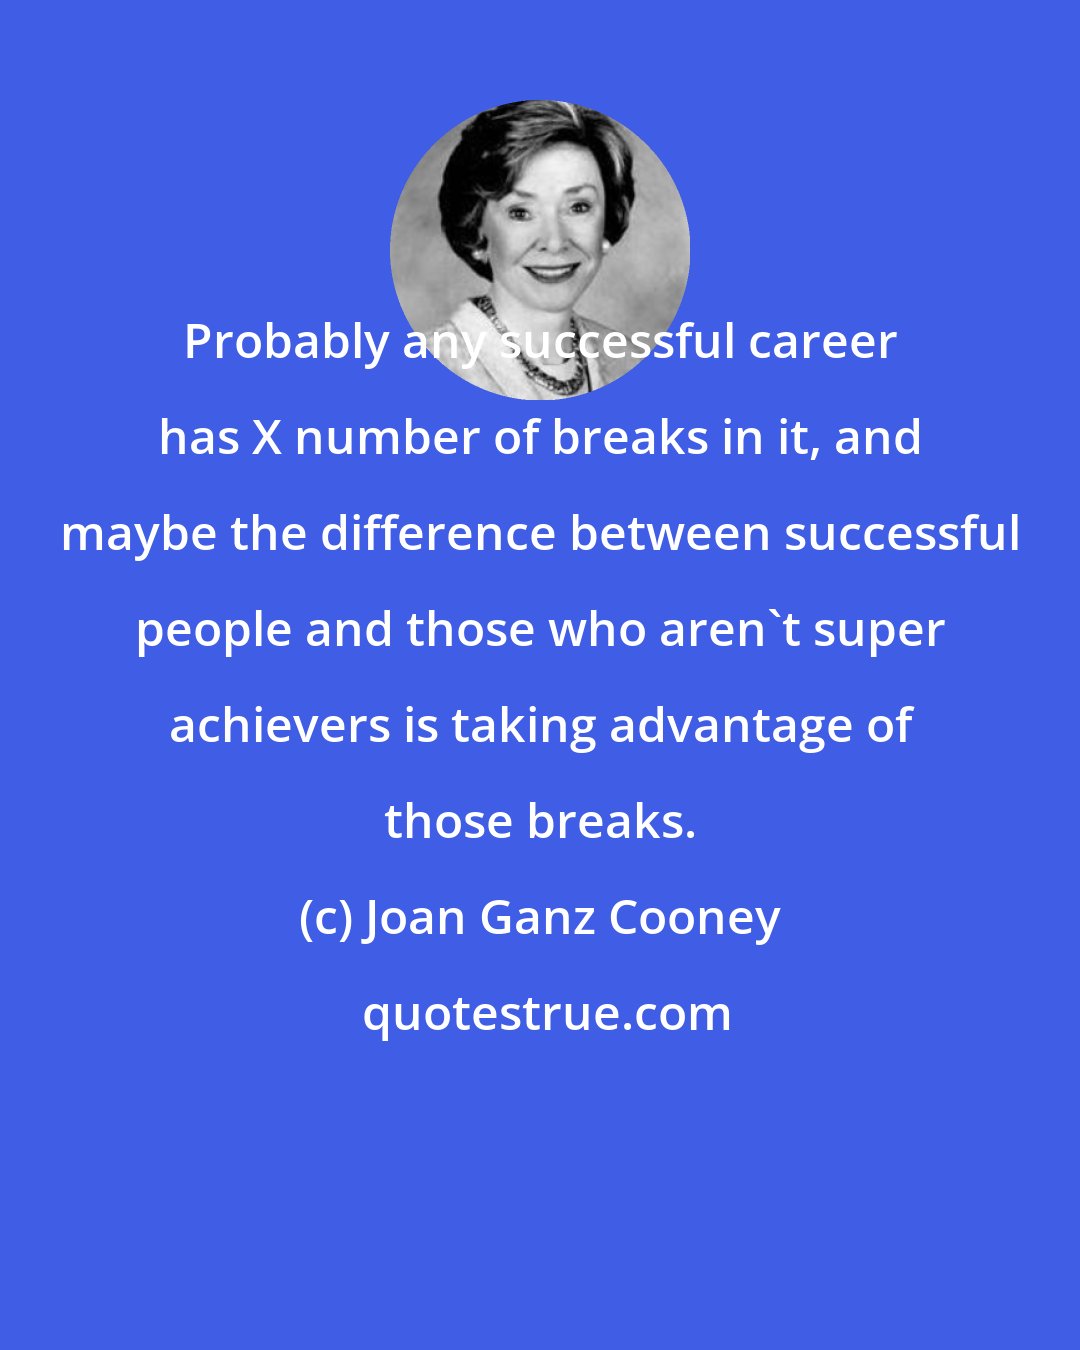 Joan Ganz Cooney: Probably any successful career has X number of breaks in it, and maybe the difference between successful people and those who aren't super achievers is taking advantage of those breaks.